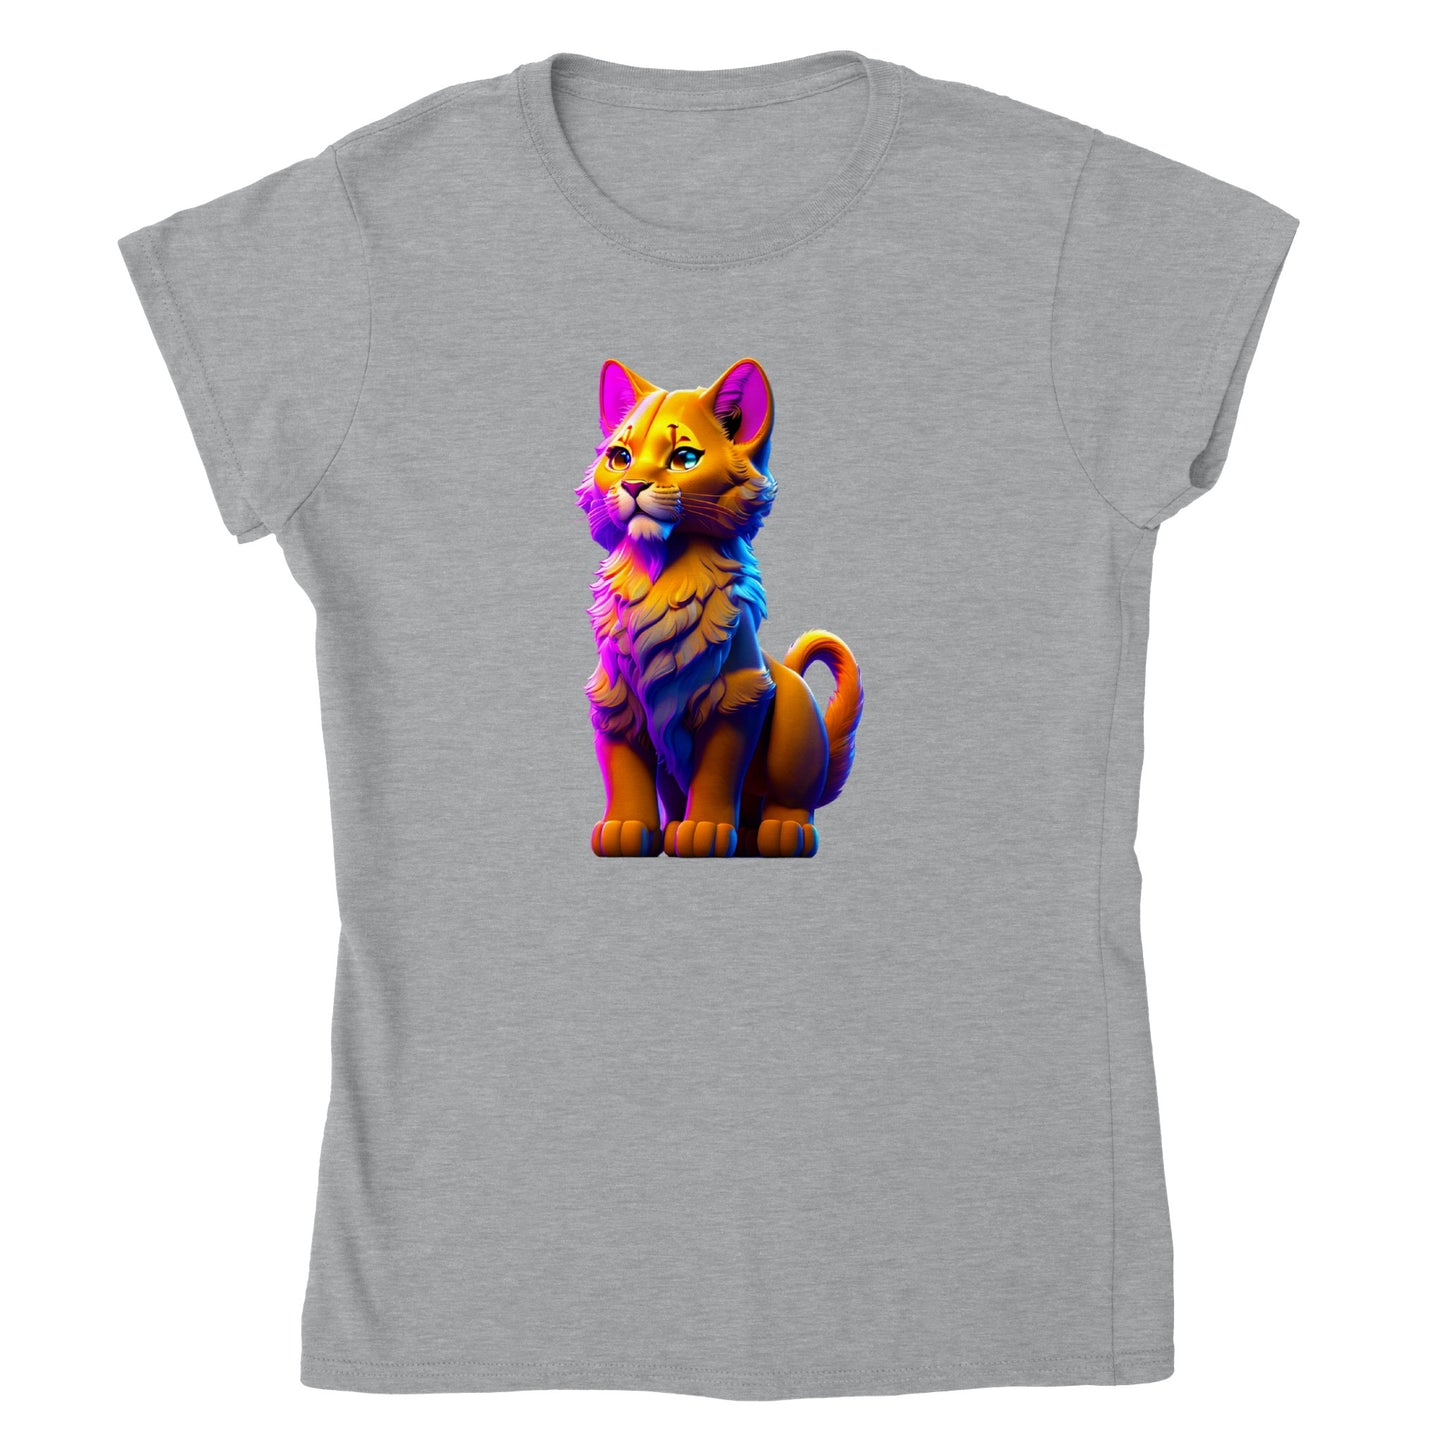 Adorable, Cool, Cute Cats and Kittens Toy - Classic Women’s Crewneck T-Shirt 50